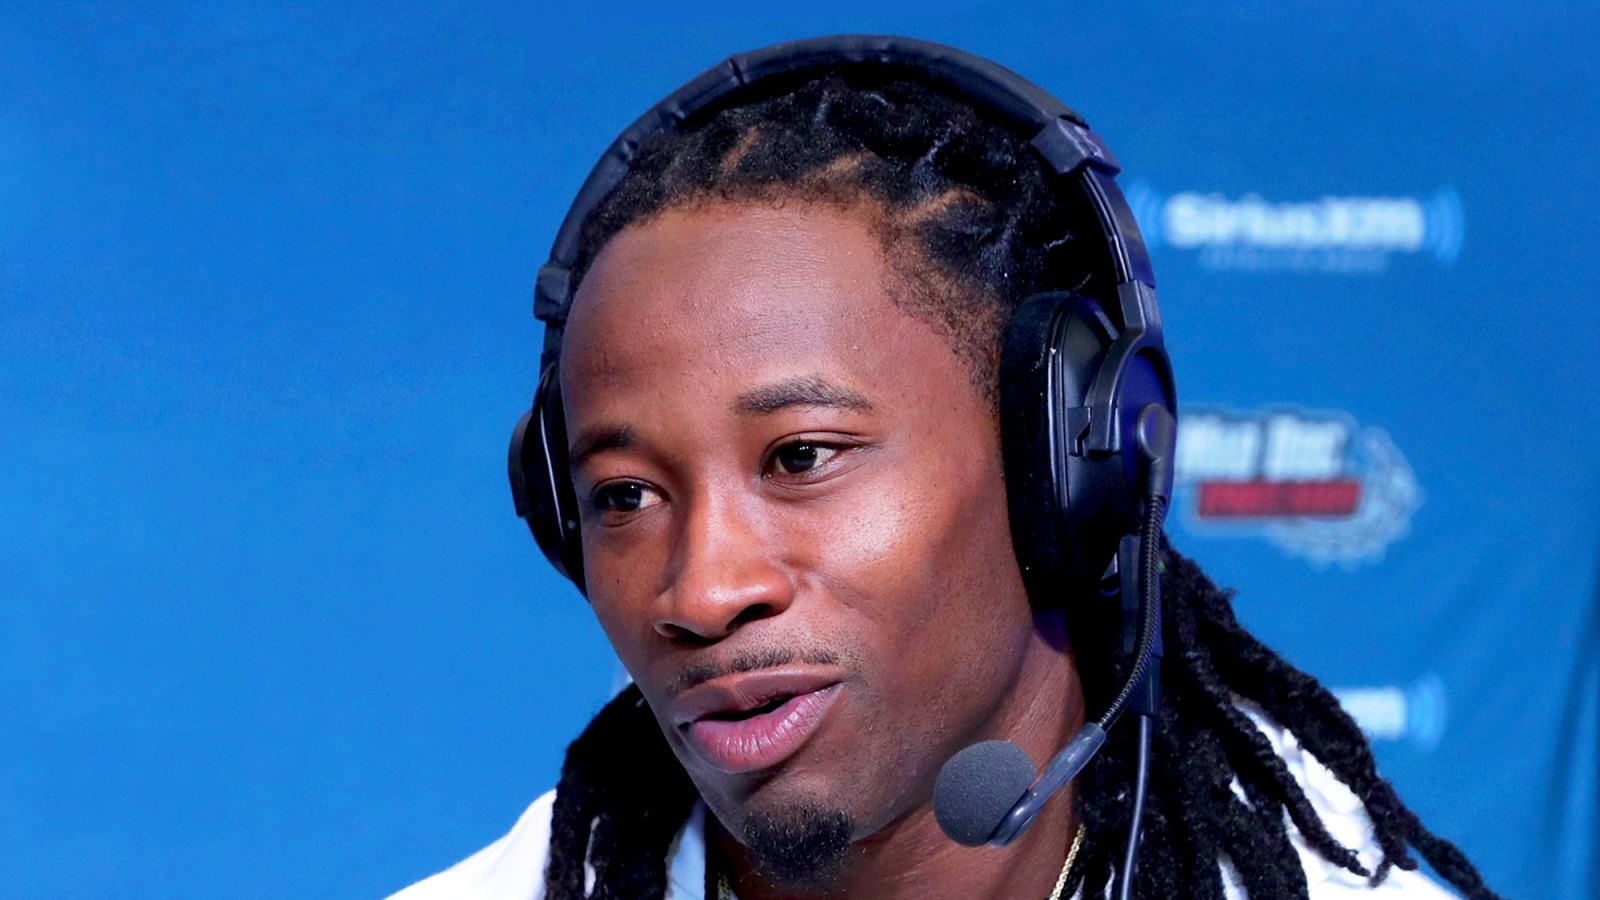 New York Giants Janoris Jenkins visits the SiriusXM set at 2017 Super Bowl LI Radio Row at the George R. Brown Convention Center in Houston, Texas.